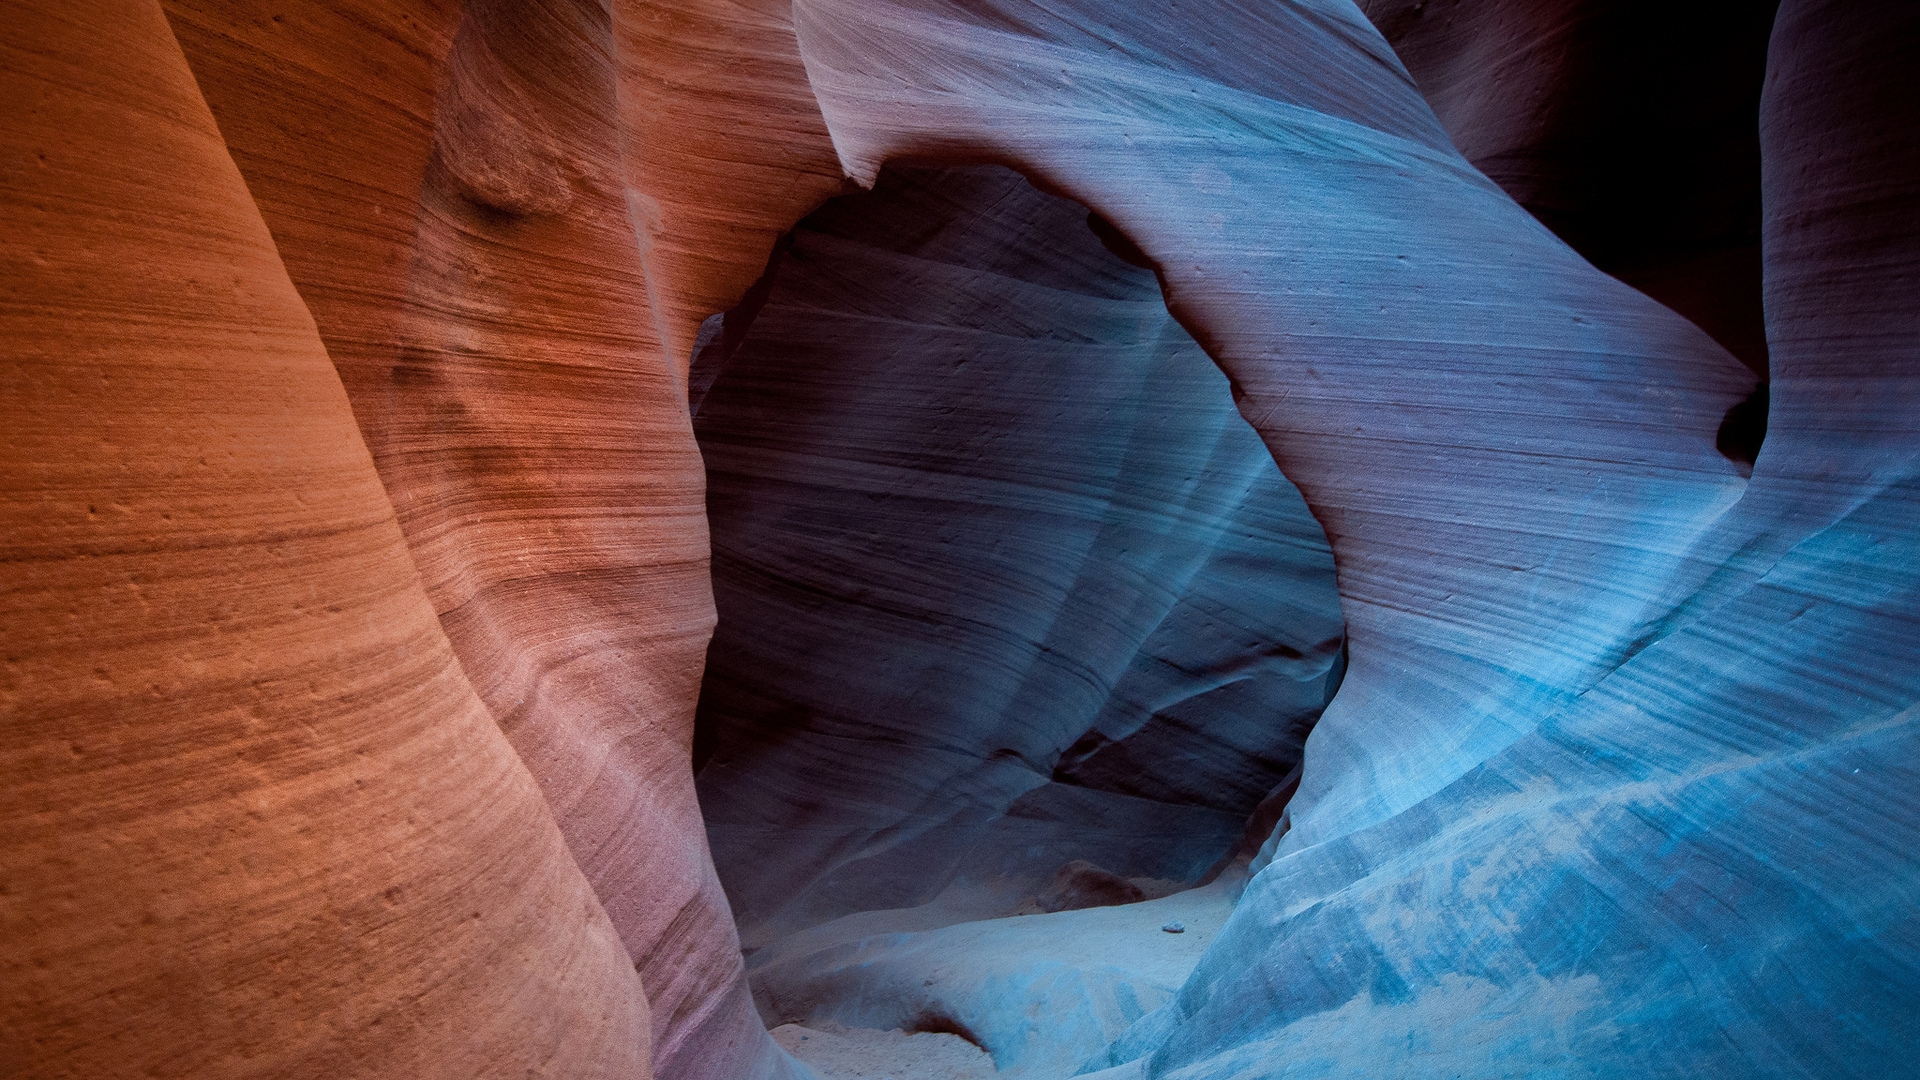 Antelope Canyon for 1920 x 1080 HDTV 1080p resolution